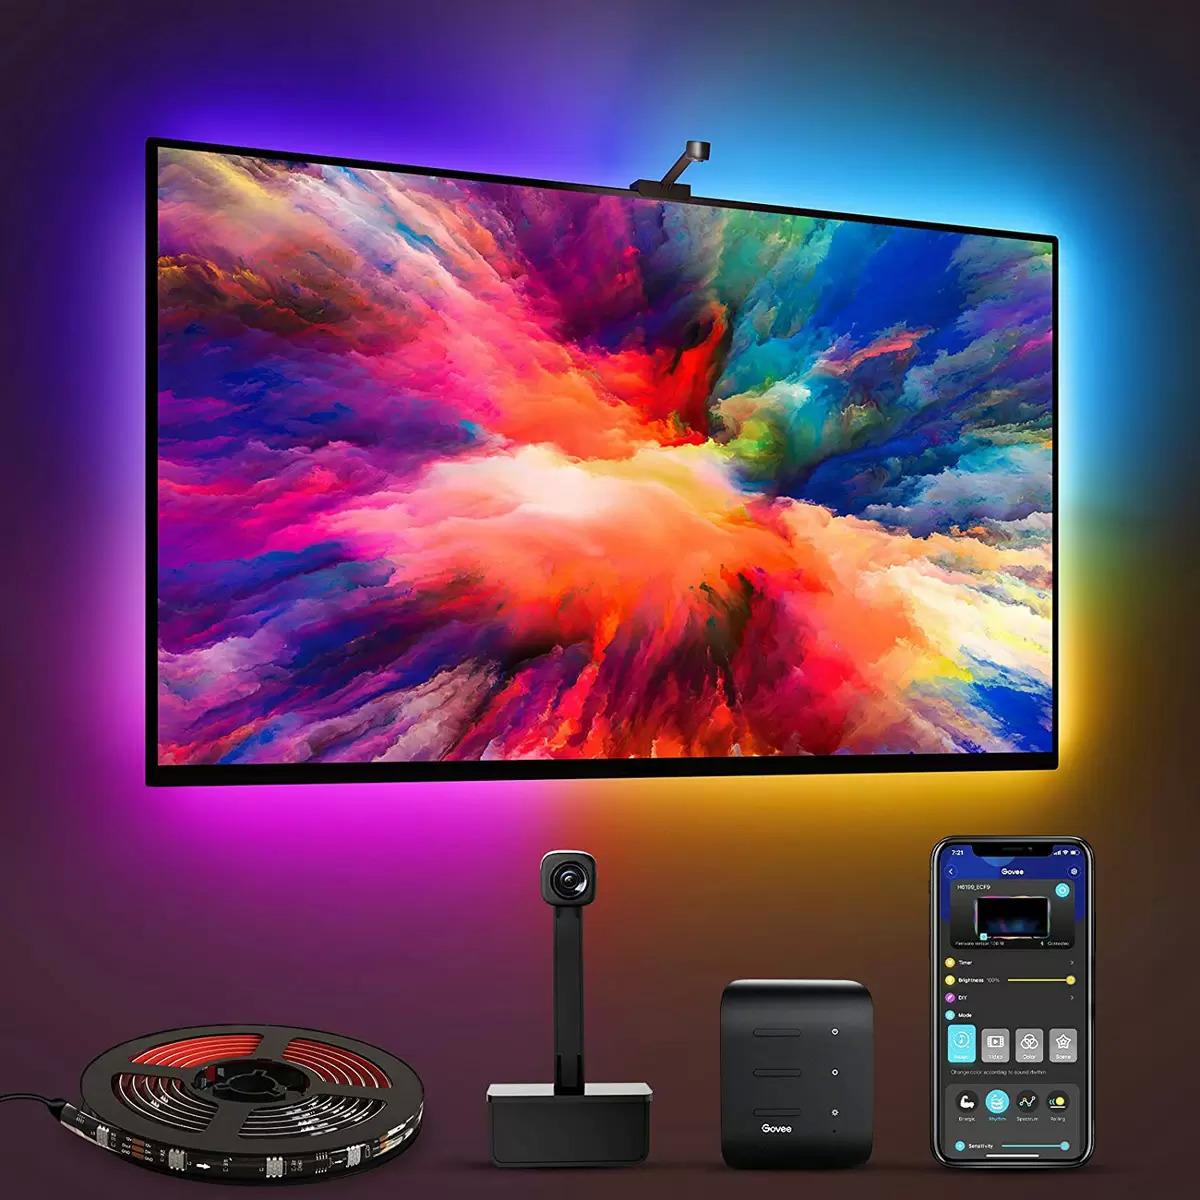 Govee Envisual Smart WiFi TV LED Backlights with Camera for $49.99 Shipped